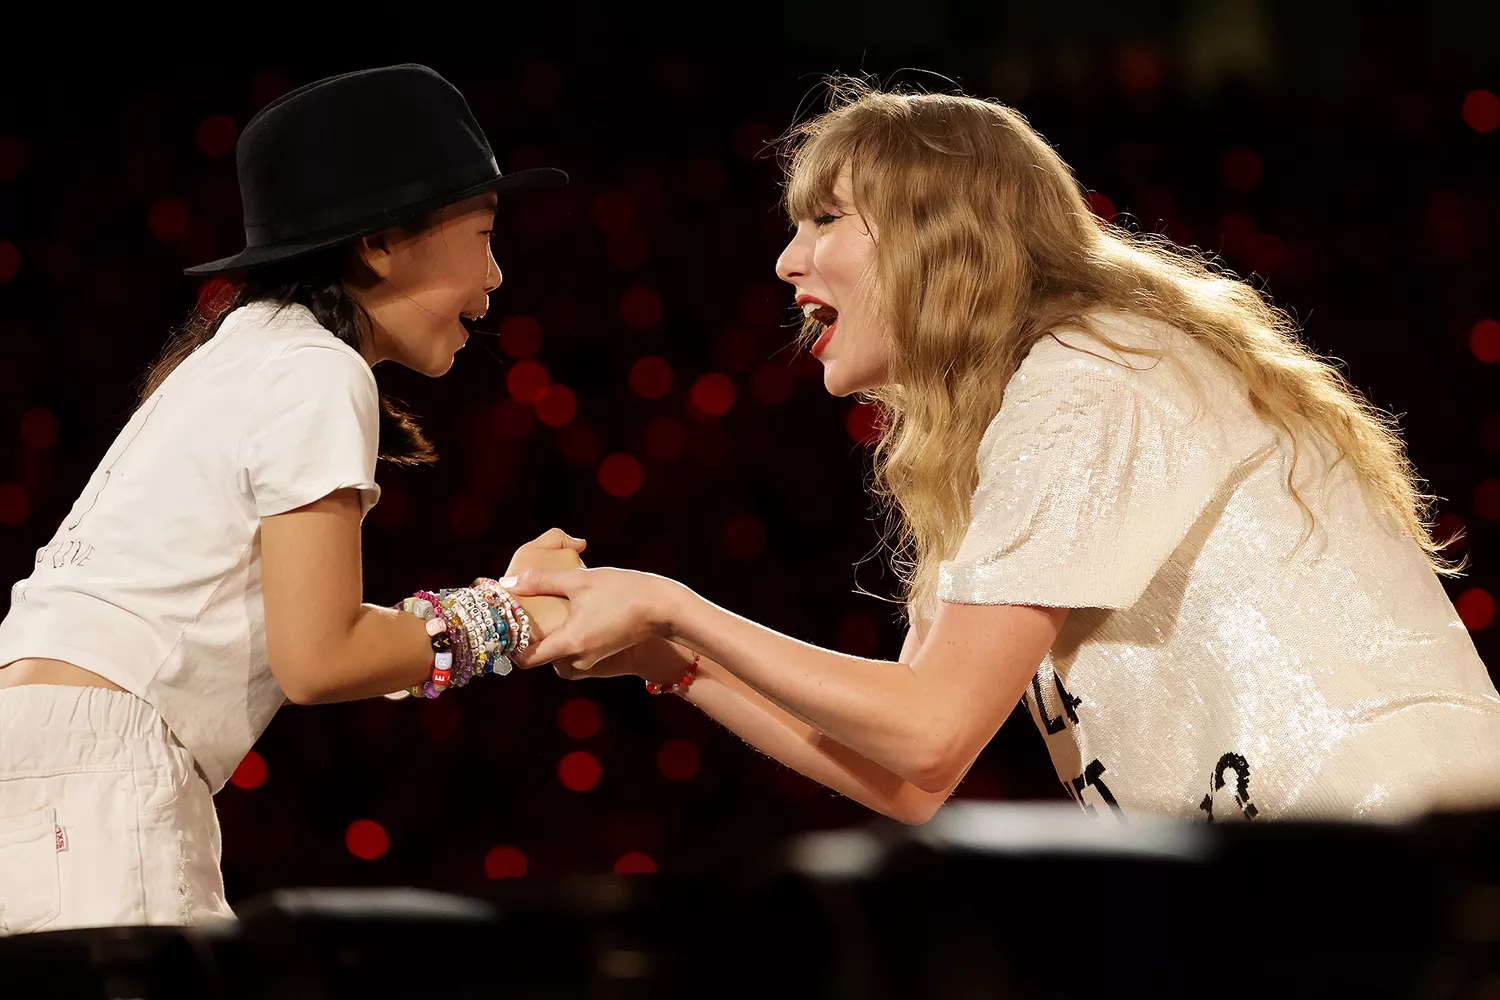 taylor-swift-shared-a-cute-moment-with-the-latest-recipient-of-her-22-hat-at-her-eras-tour-show